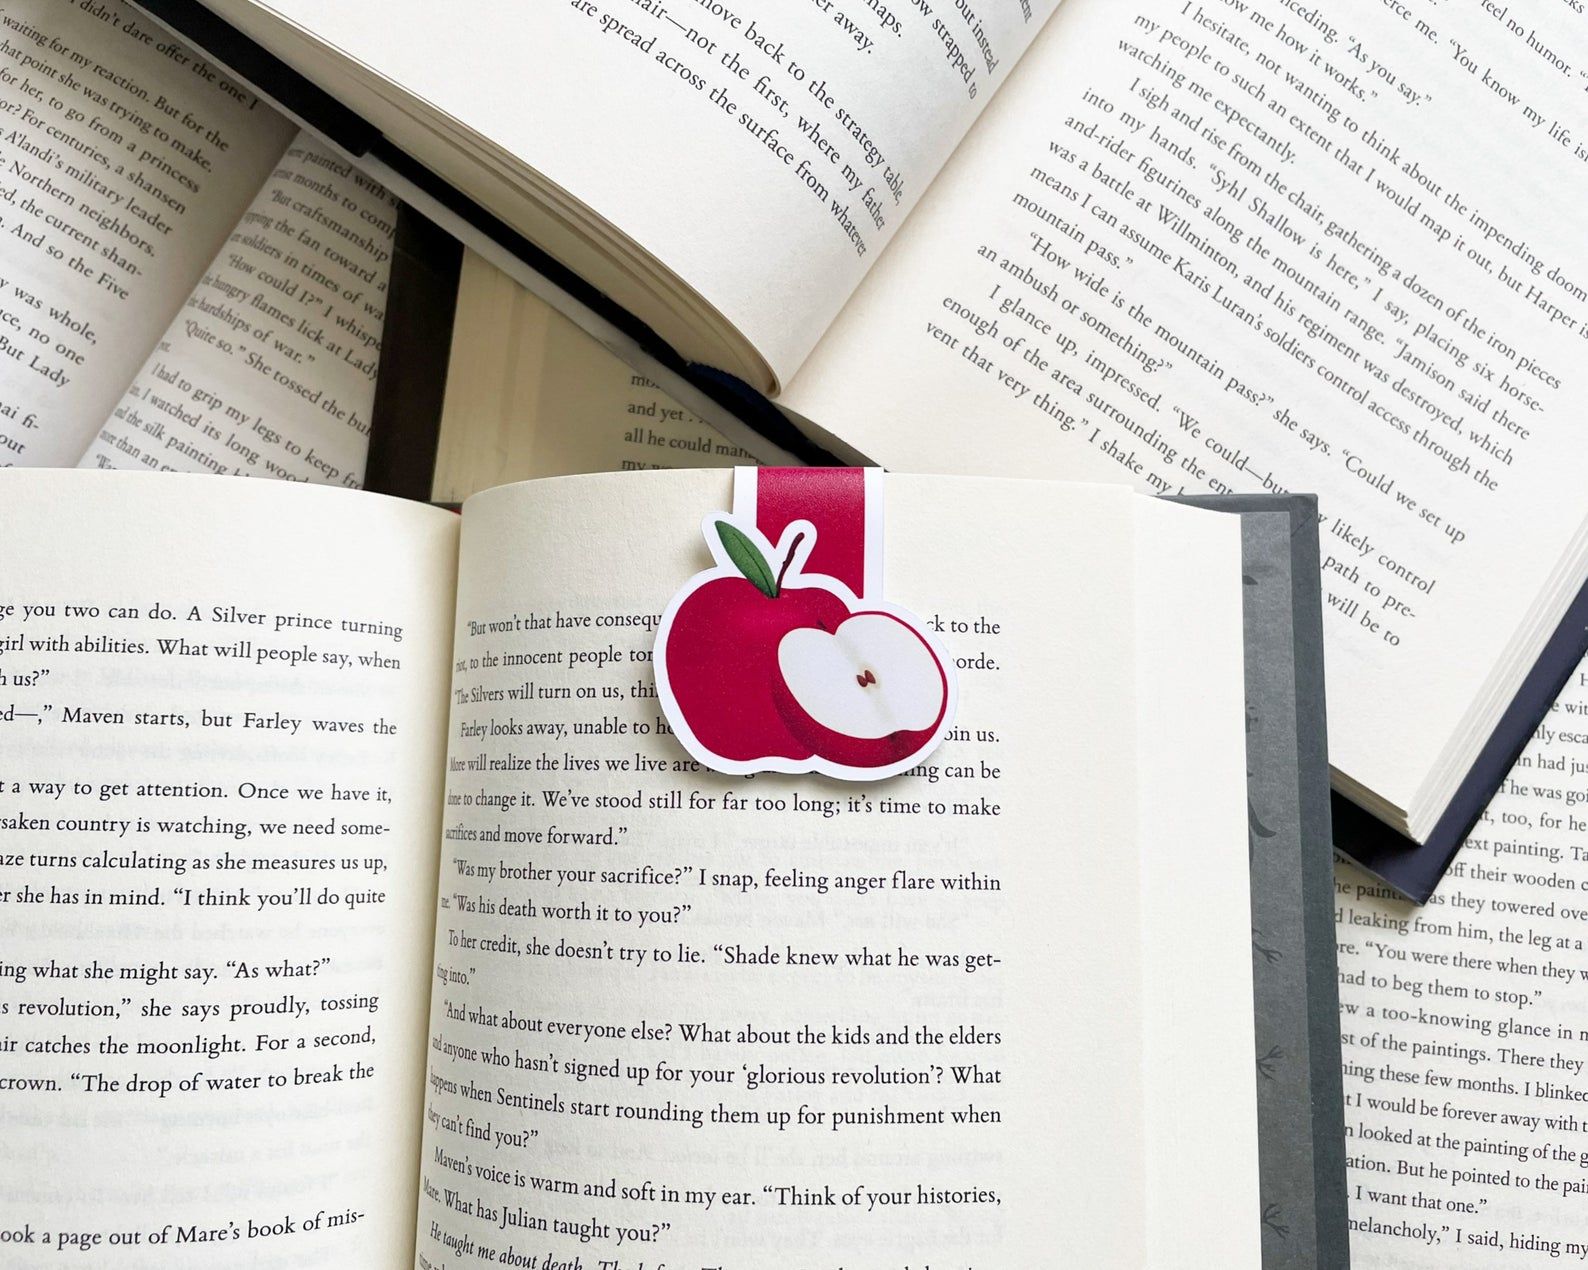 Image of a magnetic bookmark in the shape and color of a red apple. 